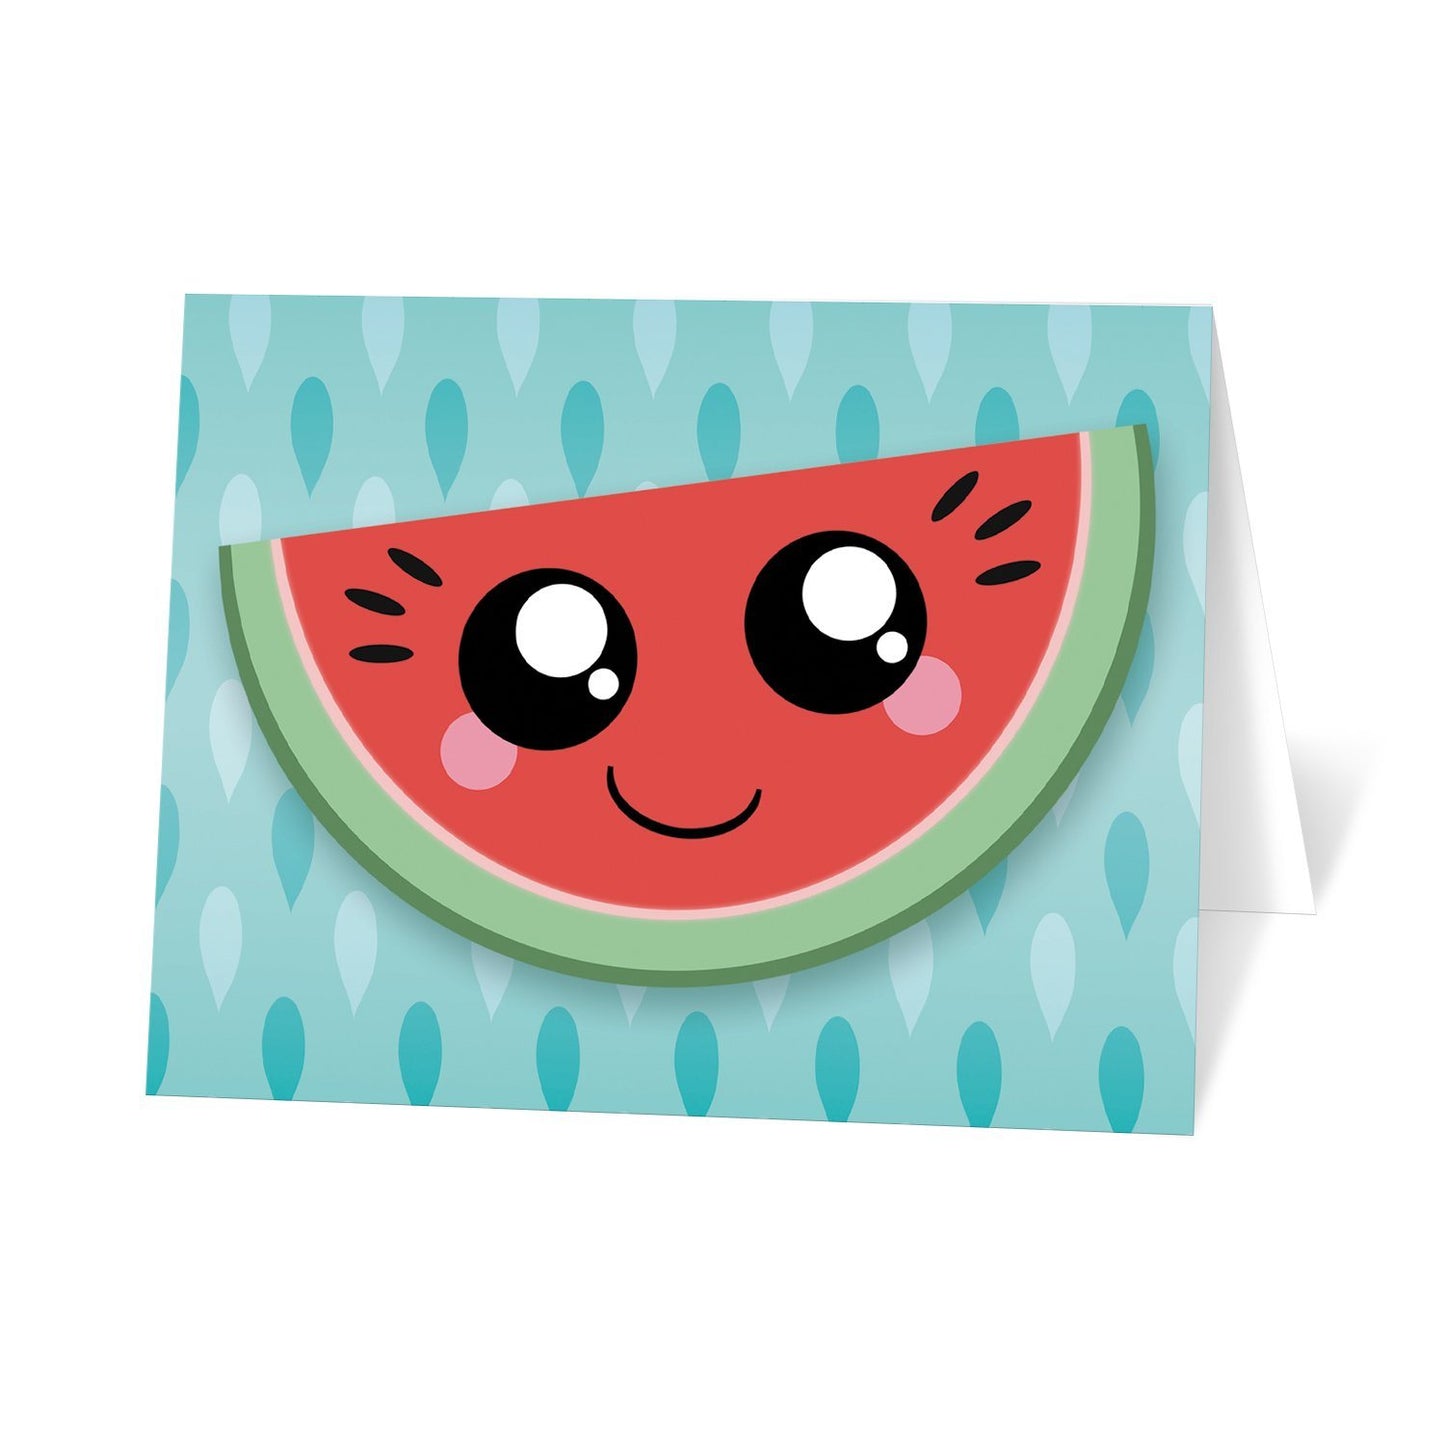 Smiling Watermelon Slice - Watermelon Note Cards at Artistically Invited